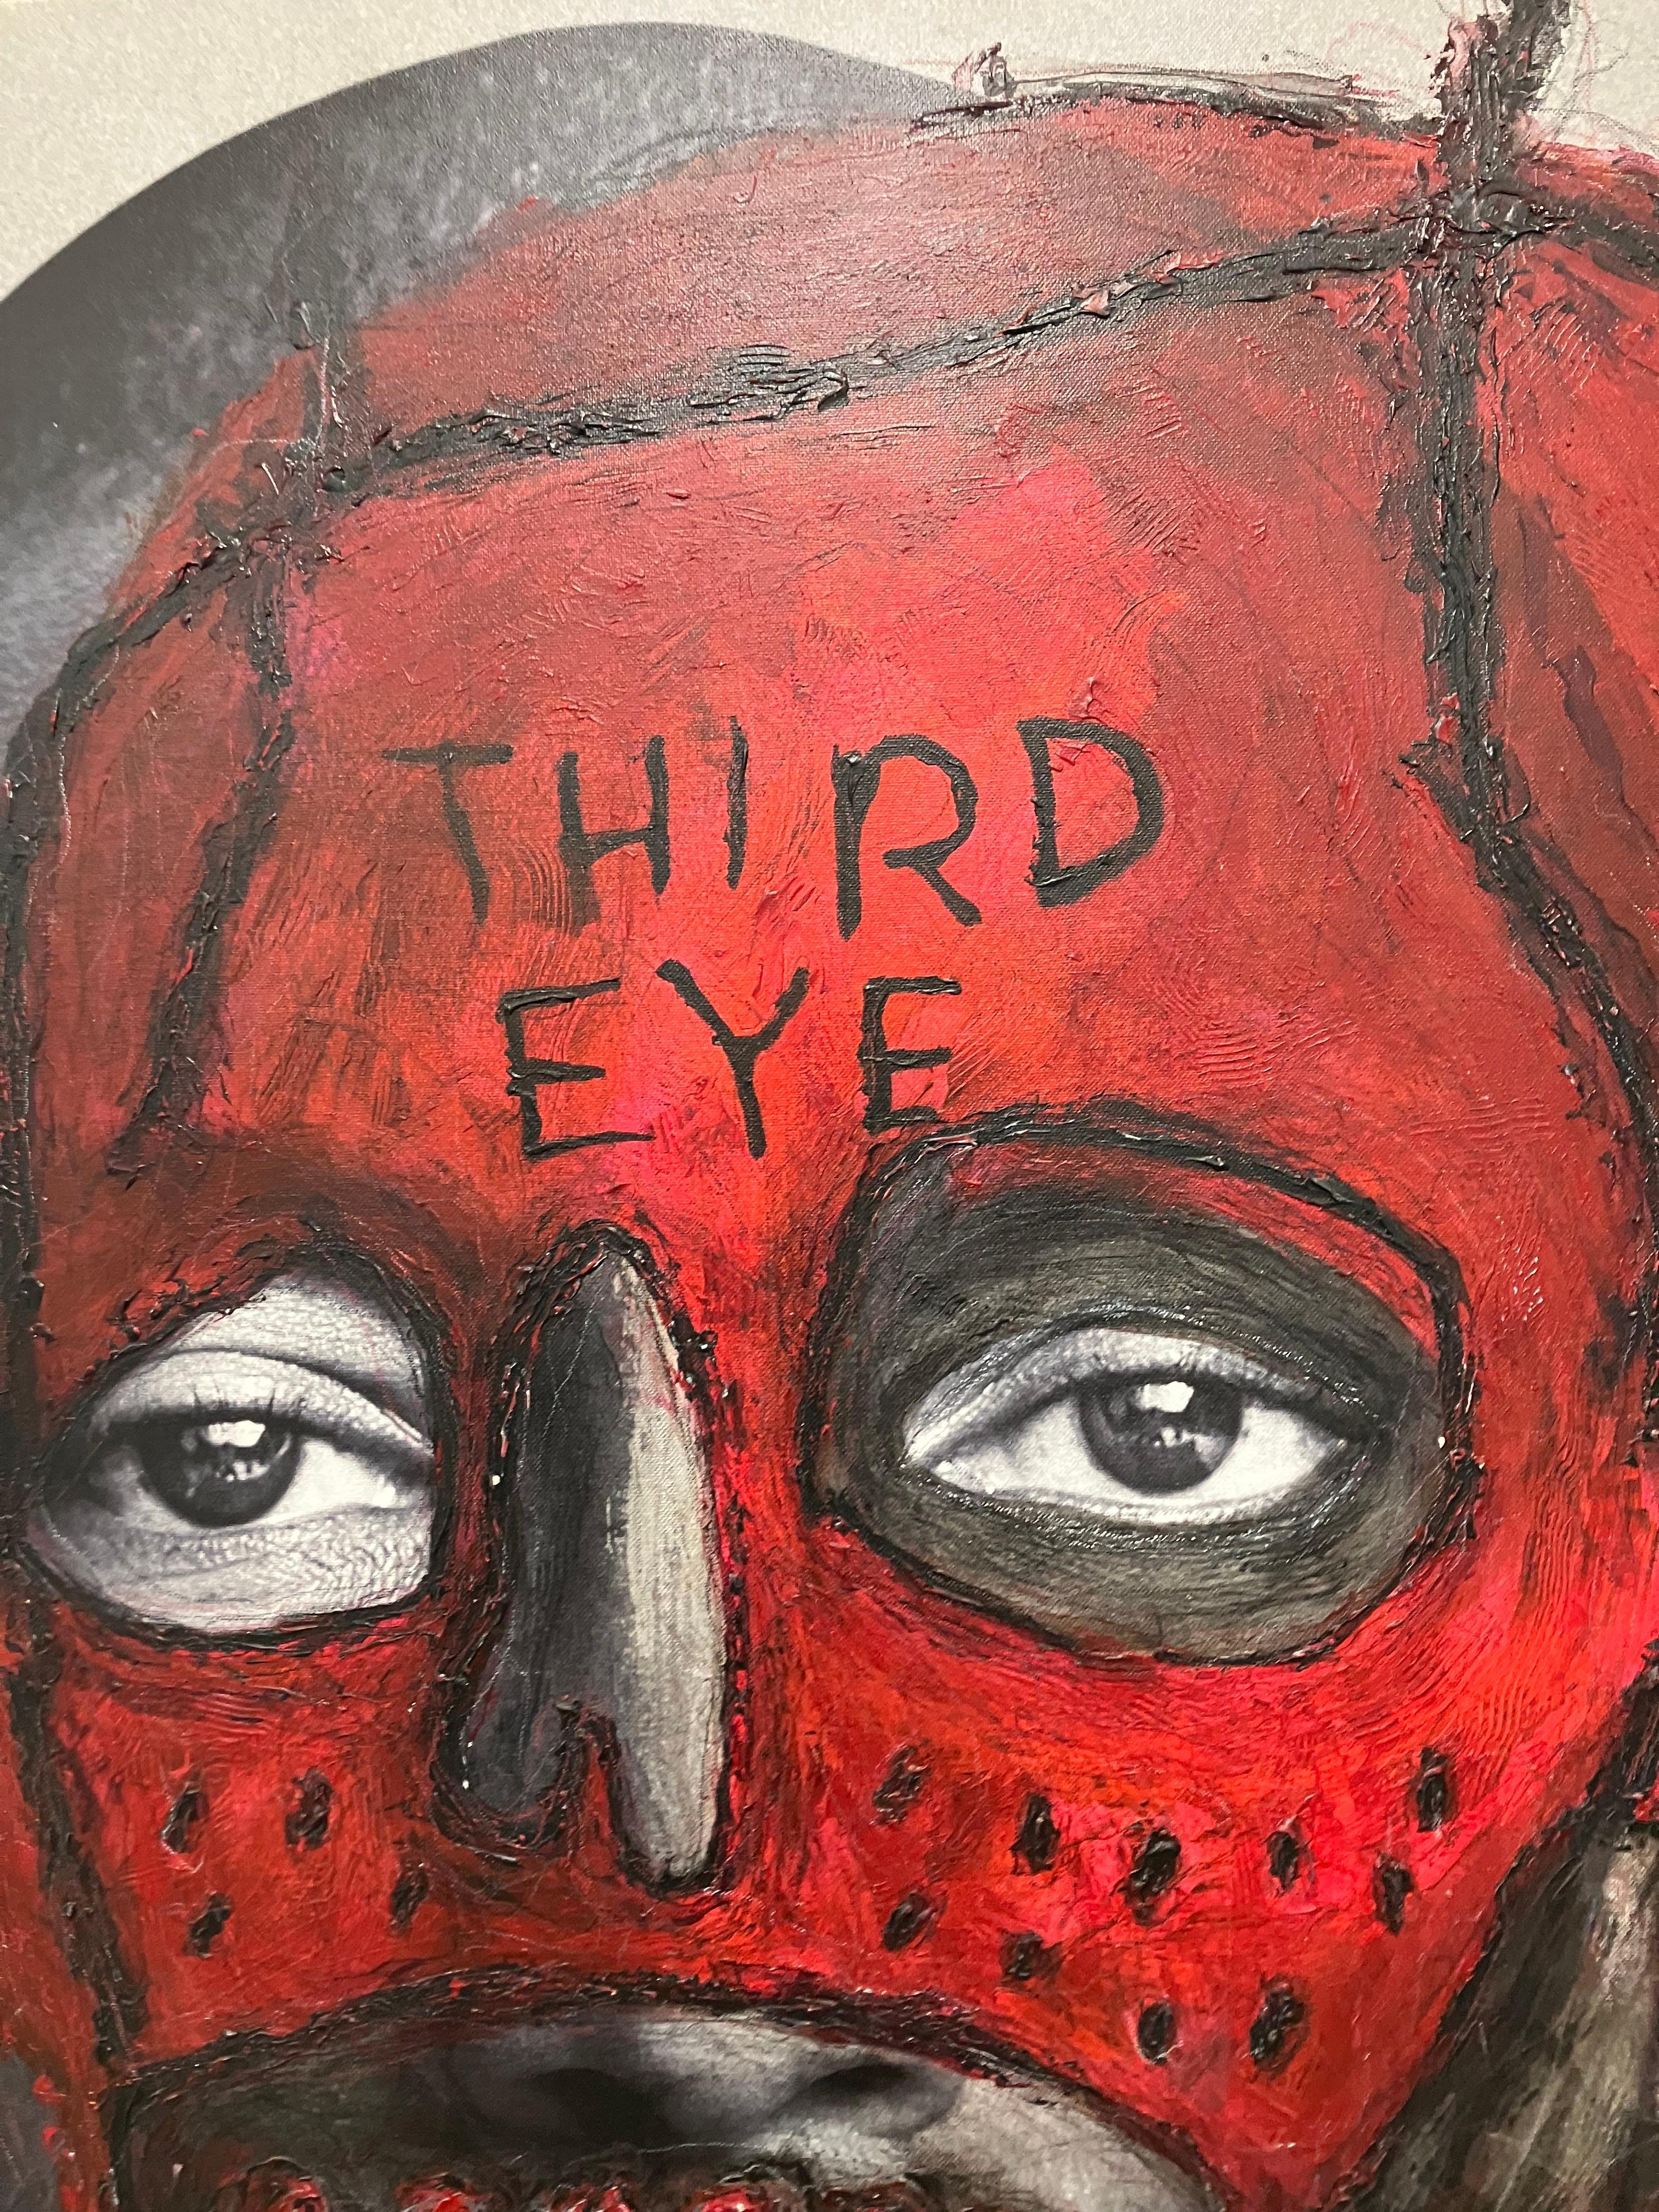 Pharrell Williams, Third Eye, 2017 by Hunter & Gatti
From The series, I will make you a star
Acrylic paint, Oil pastel pigment print on canvas. 
Size: 74 H x 52 W in. 
Mixed Media
Signed front and signed back 
Mounted on a stretcher

